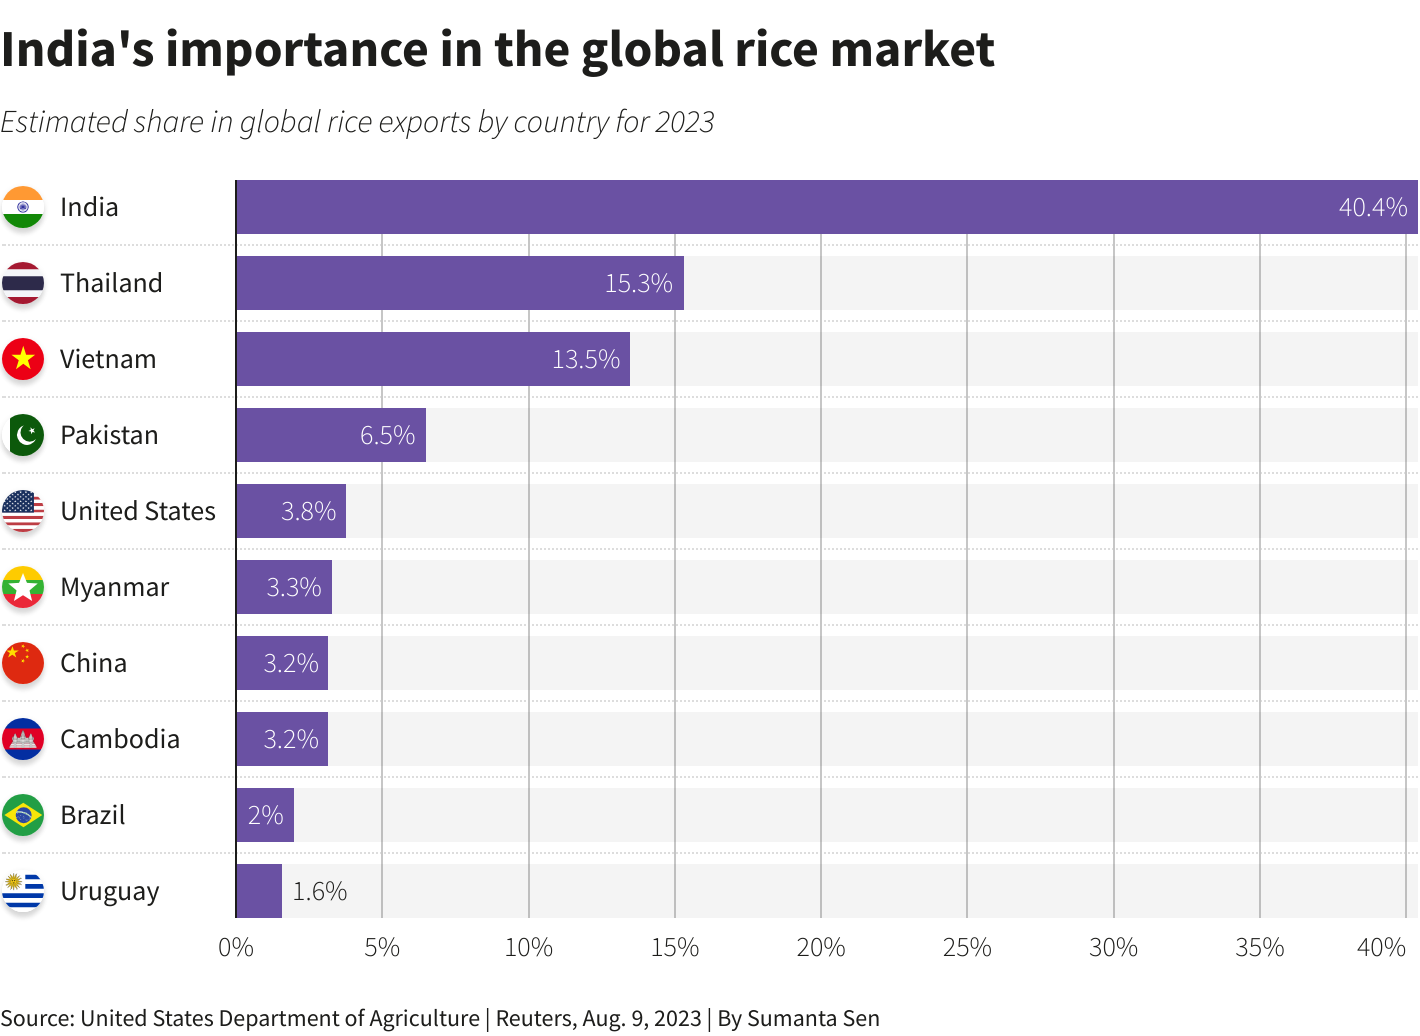 India's importance in the global rice market